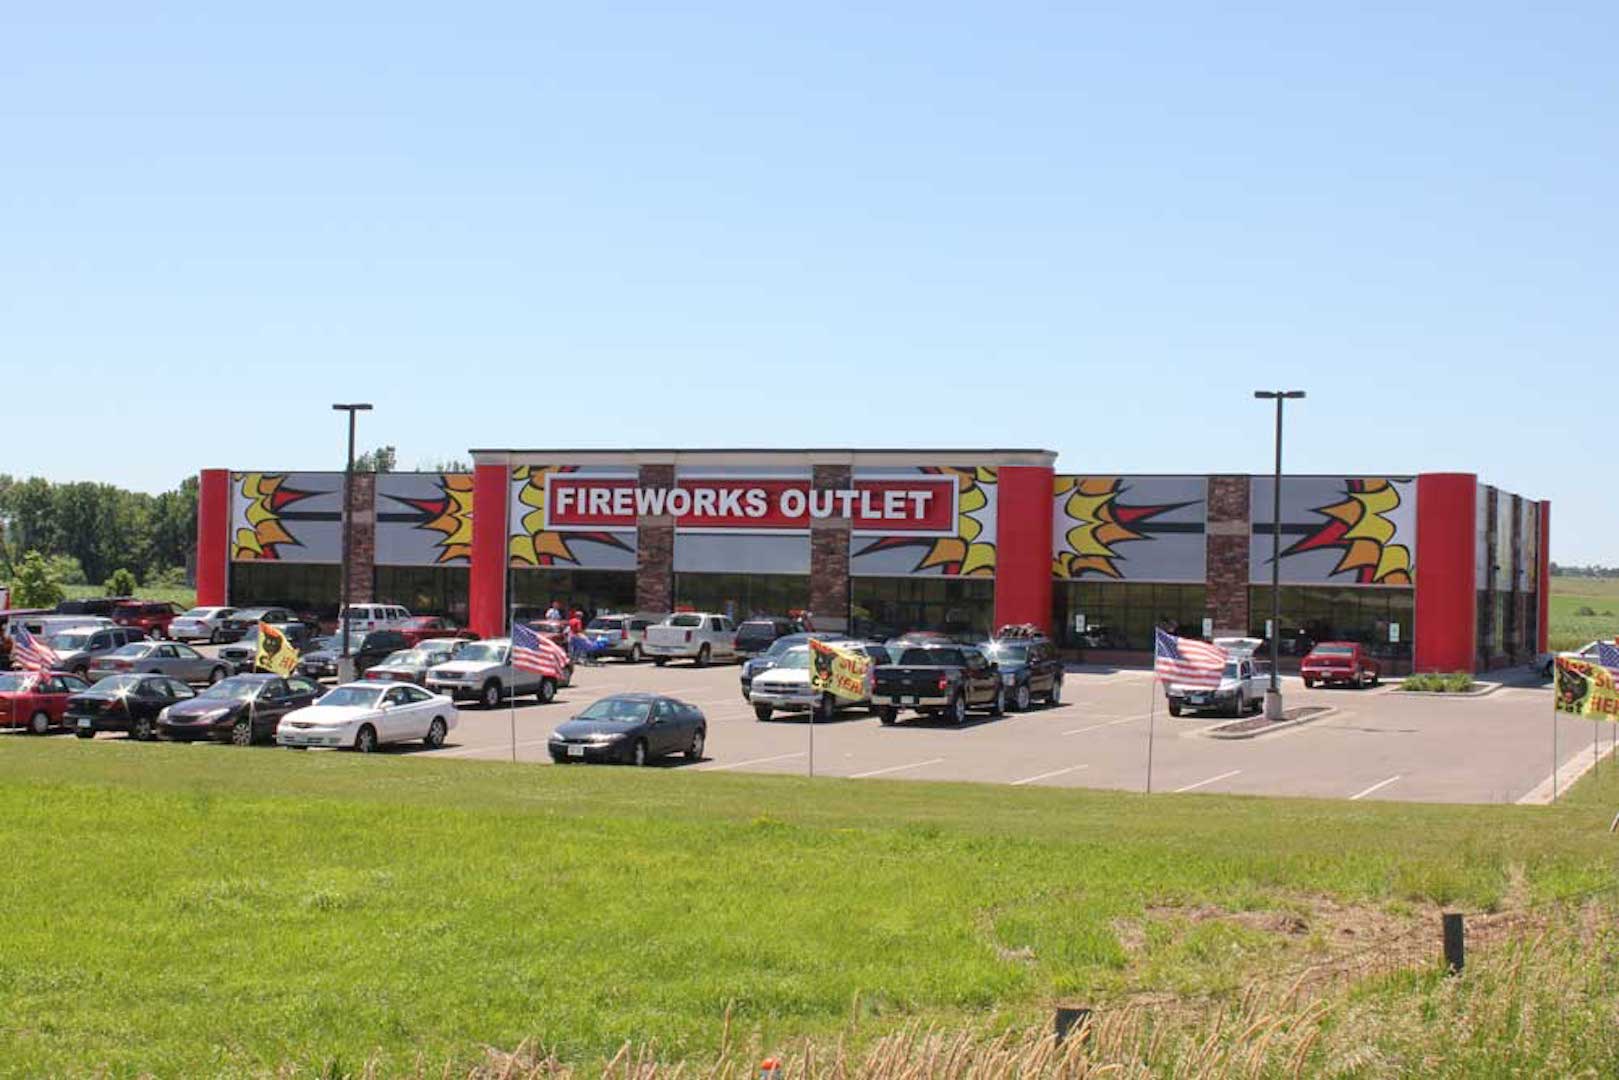 Pyro City Fireworks Outlet in Baldwin, Wisconsin